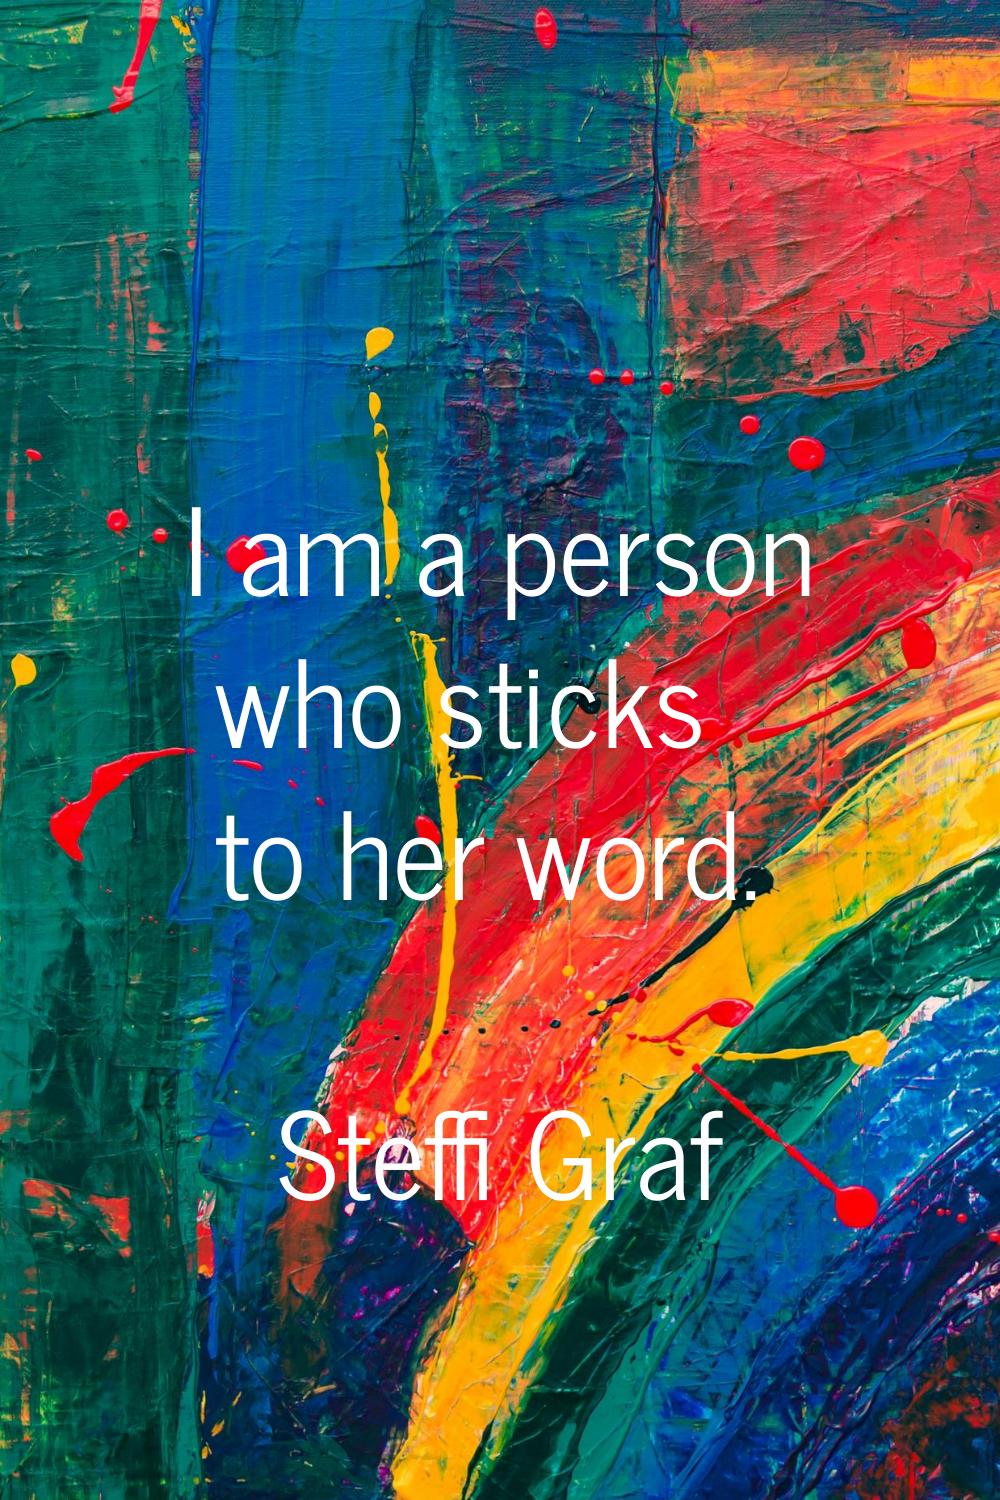 I am a person who sticks to her word.